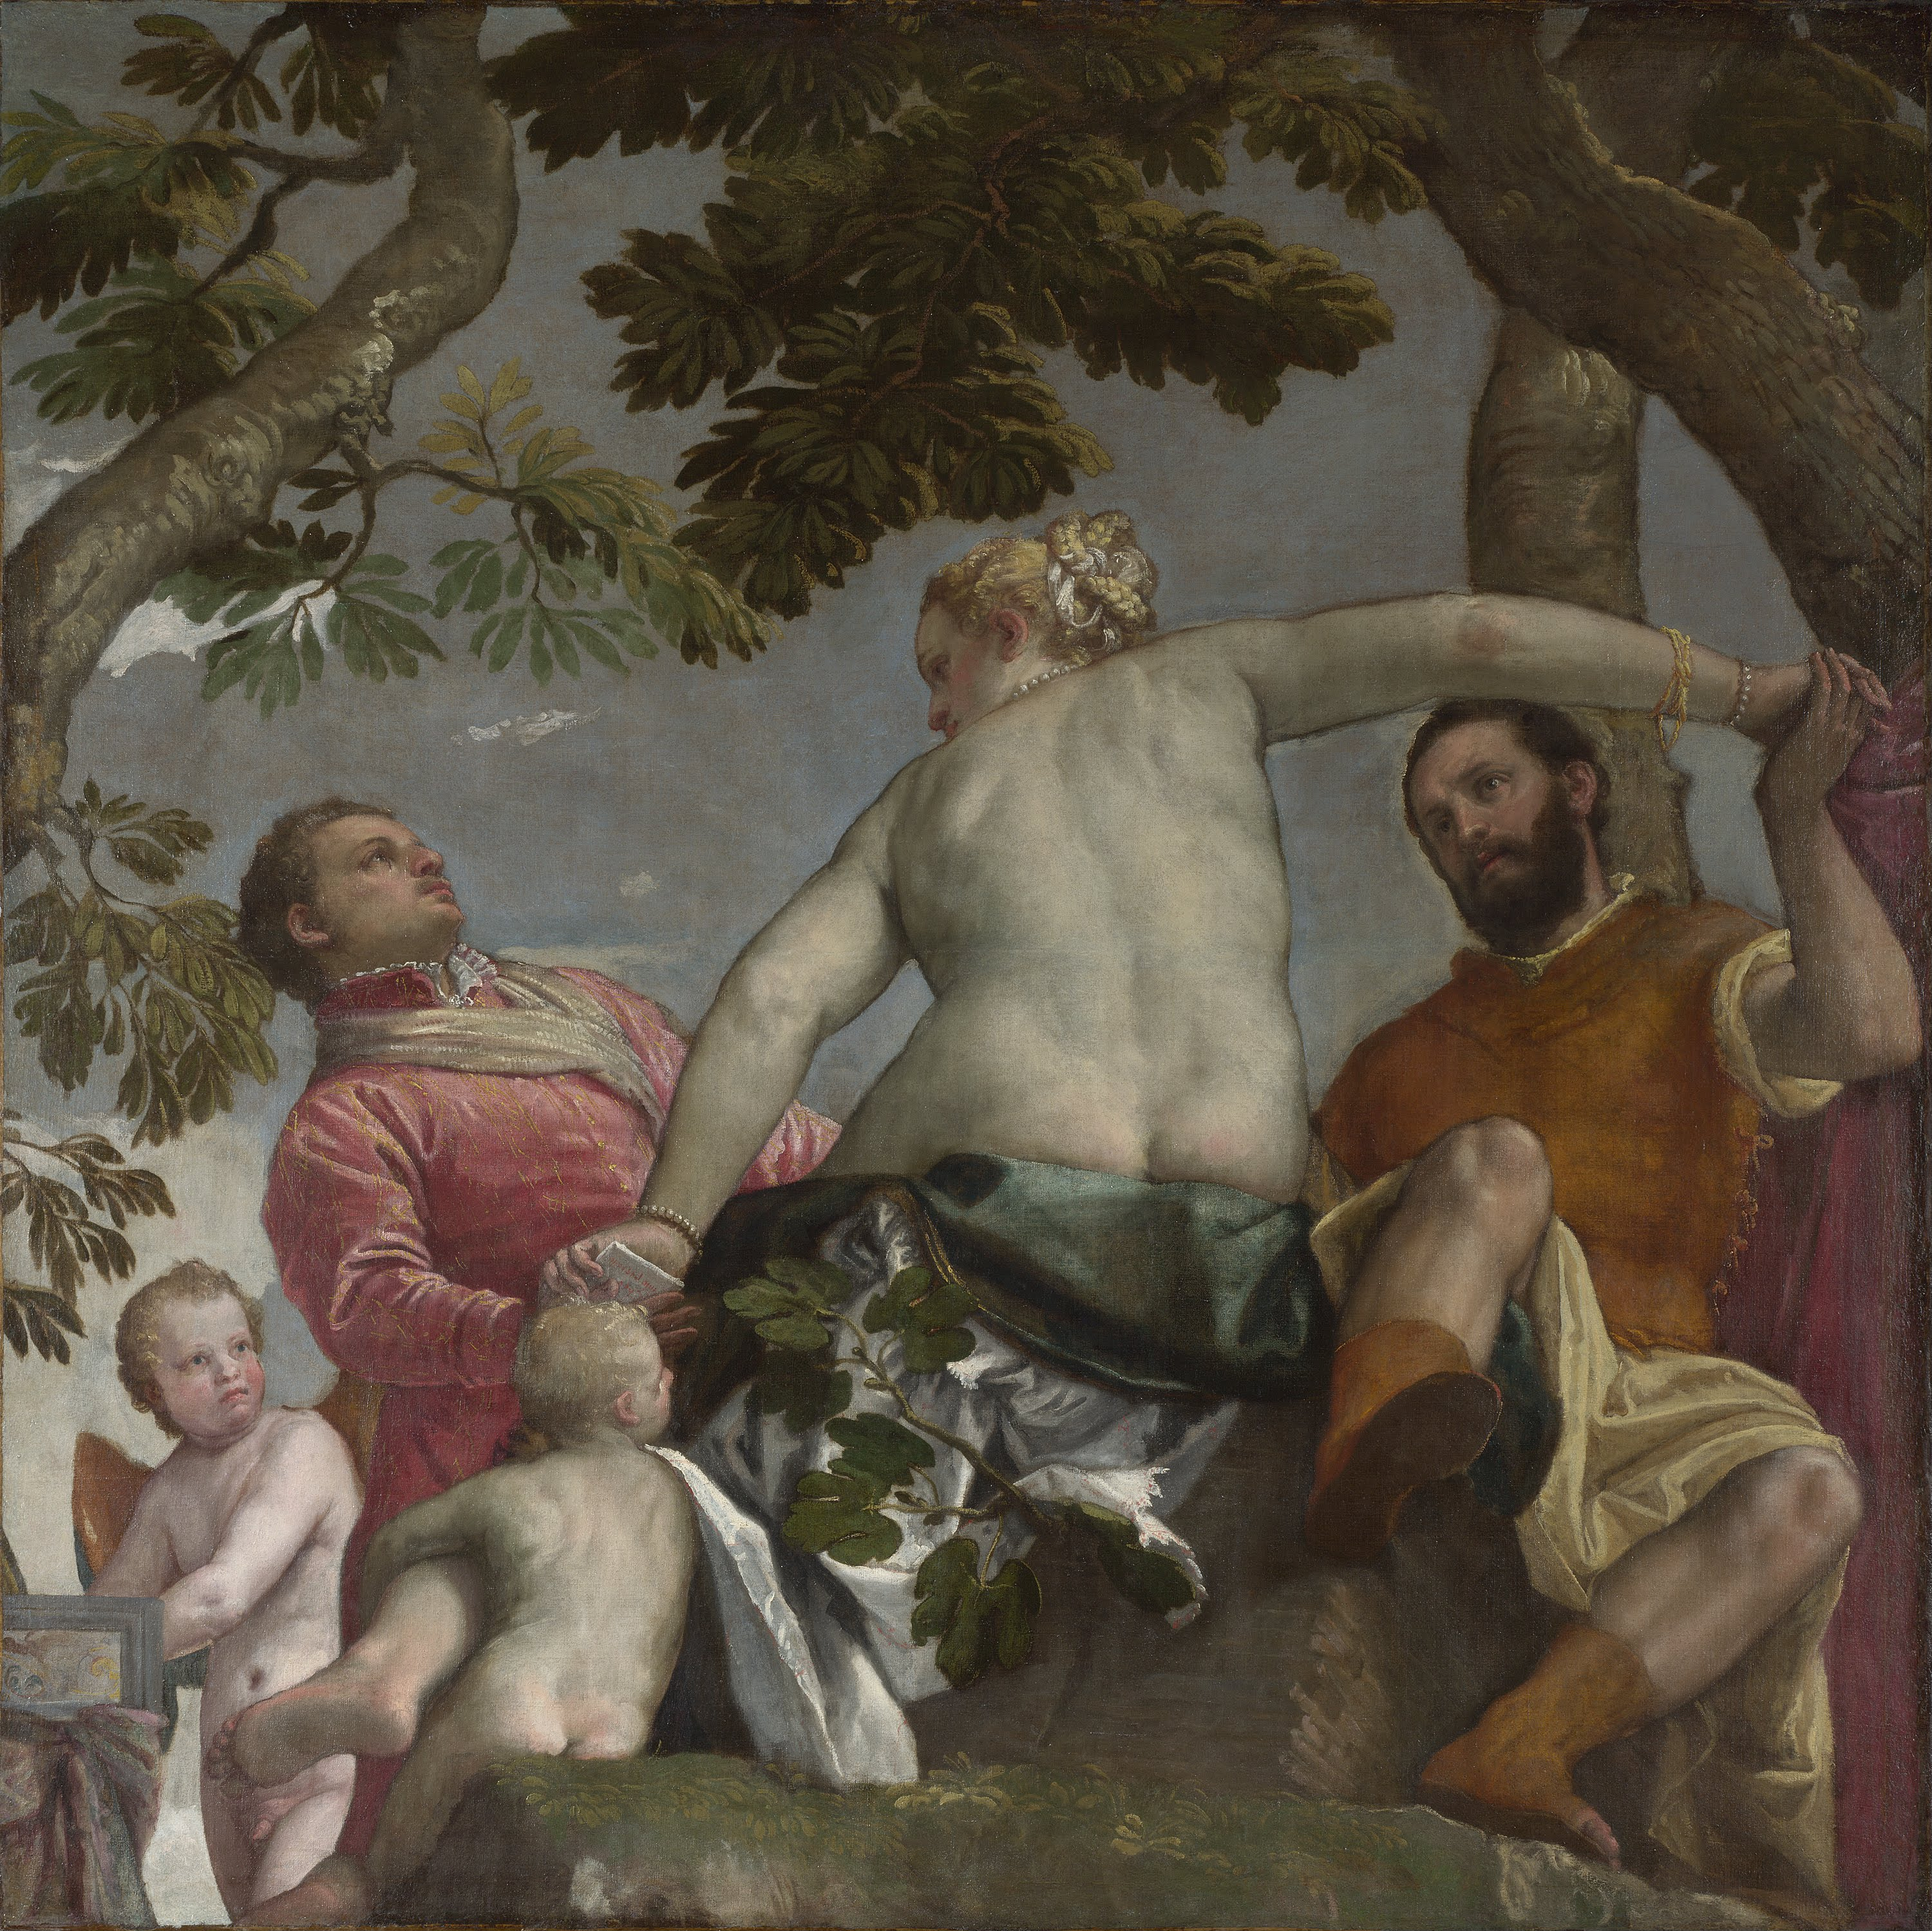 Infedeltà by Paolo Veronese - 1575 - 189,9 x 189,9 cm 